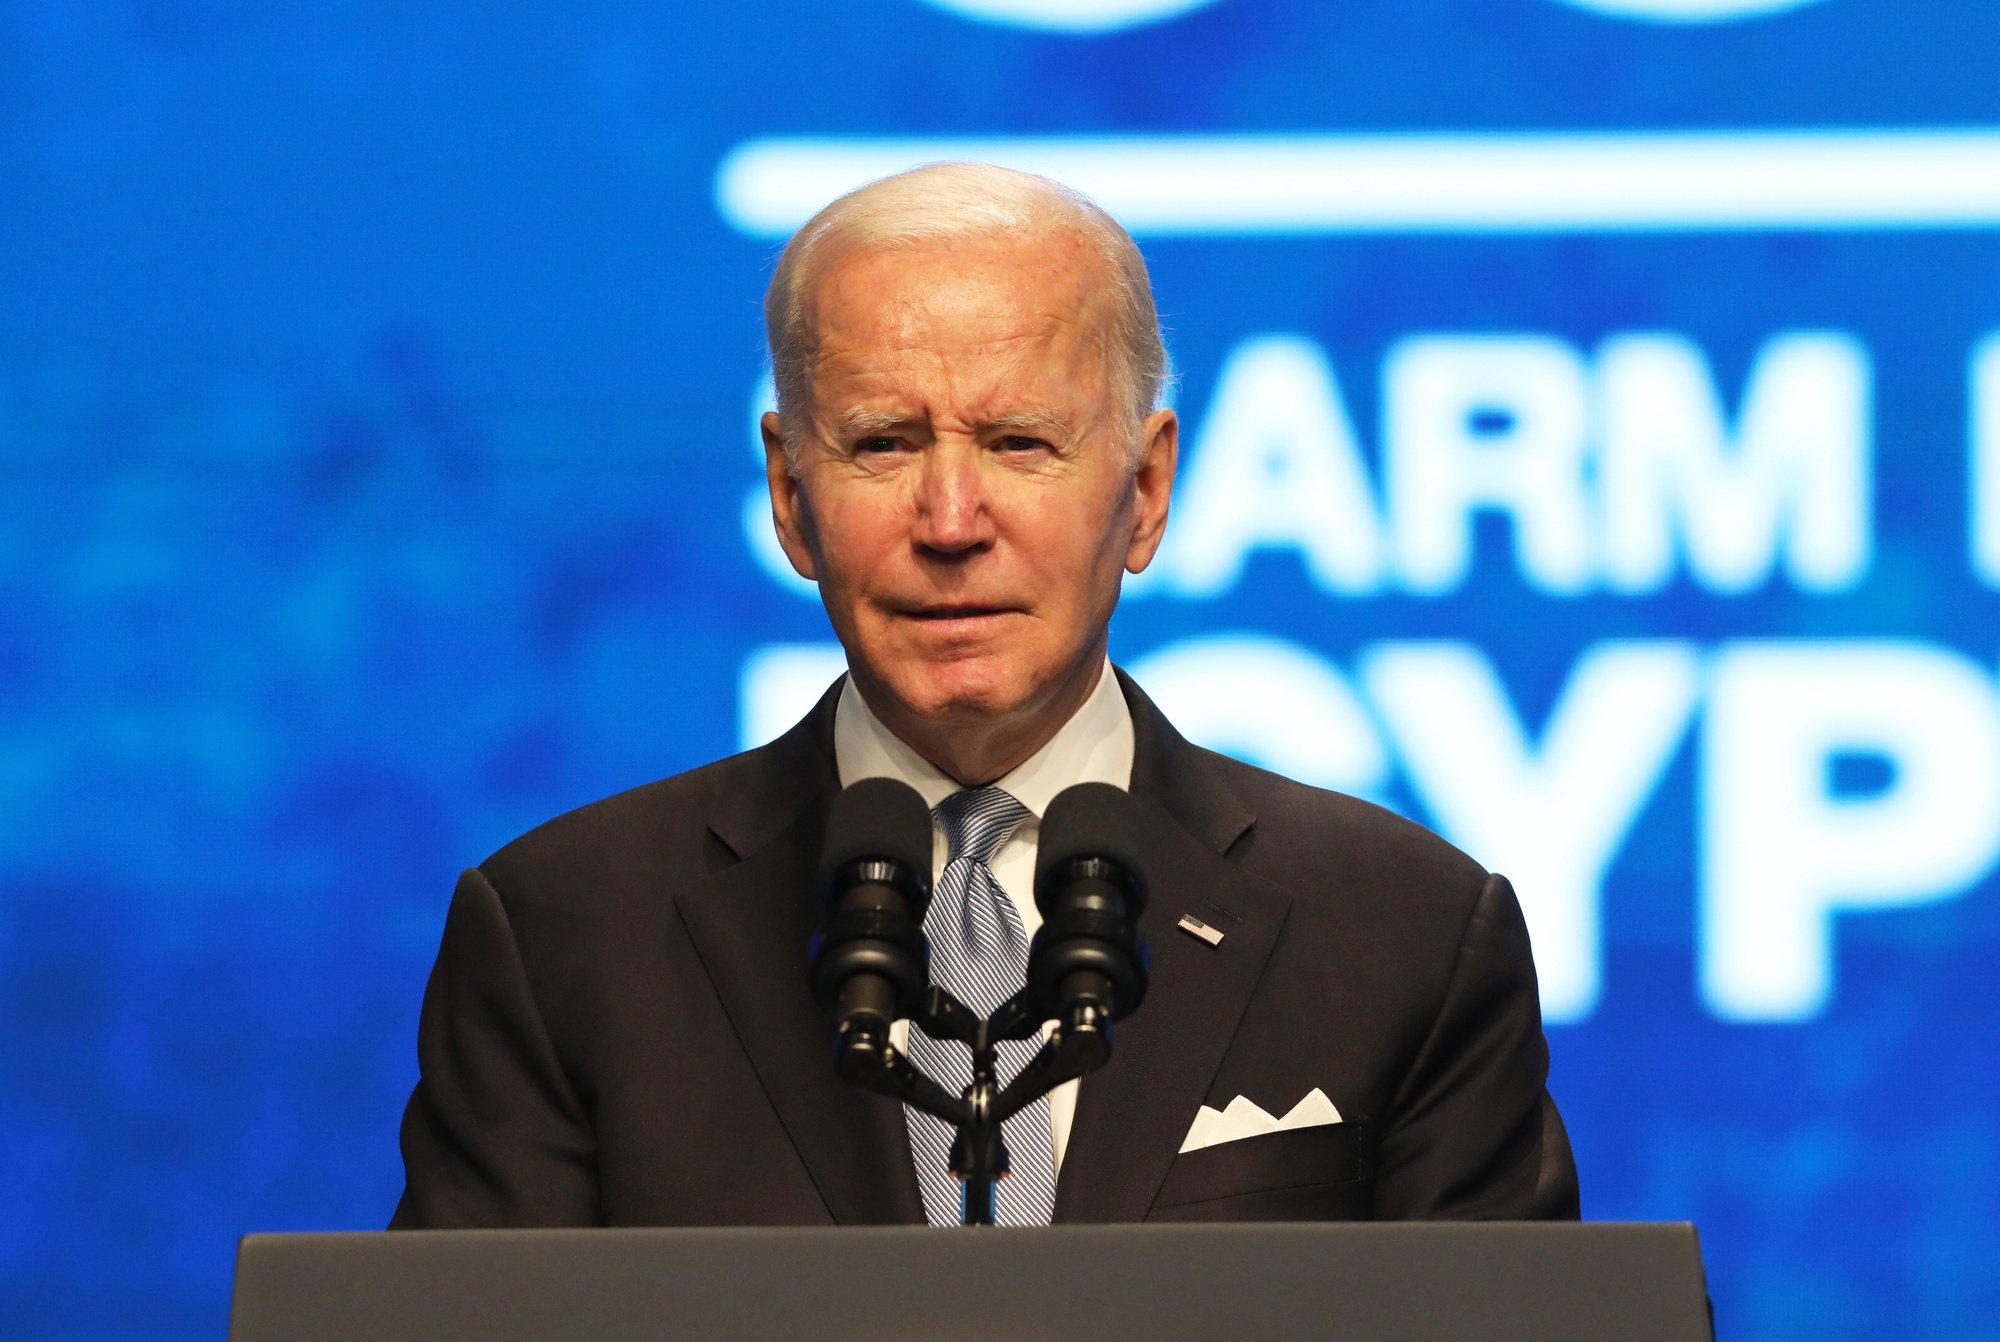 epa10300106 US President Joe Biden delivers his speech at the 2022 United Nations Climate Change Conference (COP27), in Sharm El-Sheikh, Egypt, 11 November 2022. The 2022 United Nations Climate Change Conference (COP27), runs from 06-18 November, and is expected to host one of the largest number of participants in the annual global climate conference as over 40,000 estimated attendees, including heads of states and governments, civil society, media and other relevant stakeholders will attend. The events will include a Climate Implementation Summit, thematic days, flagship initiatives, and Green Zone activities engaging with climate and other global challenges.  EPA/KHALED ELFIQI